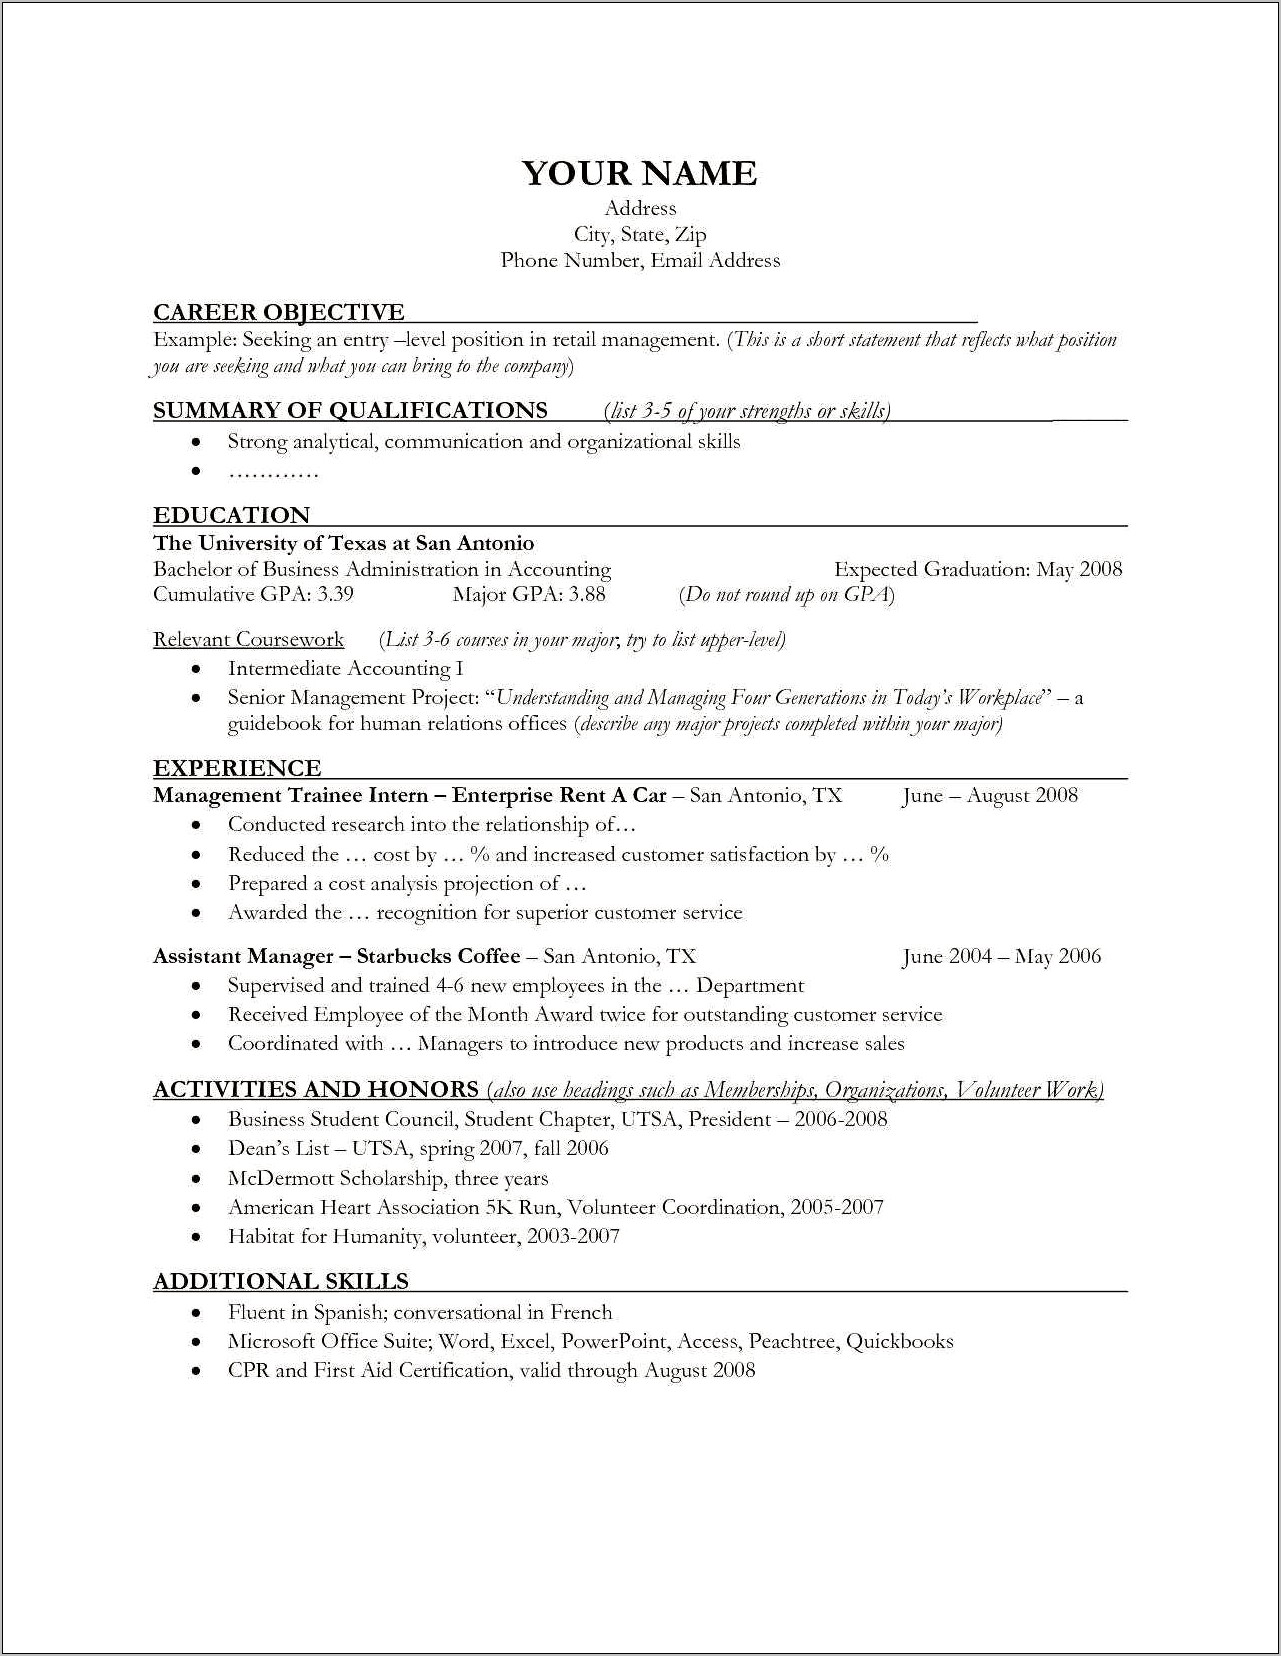 Example Resume Objectives For Management Positions